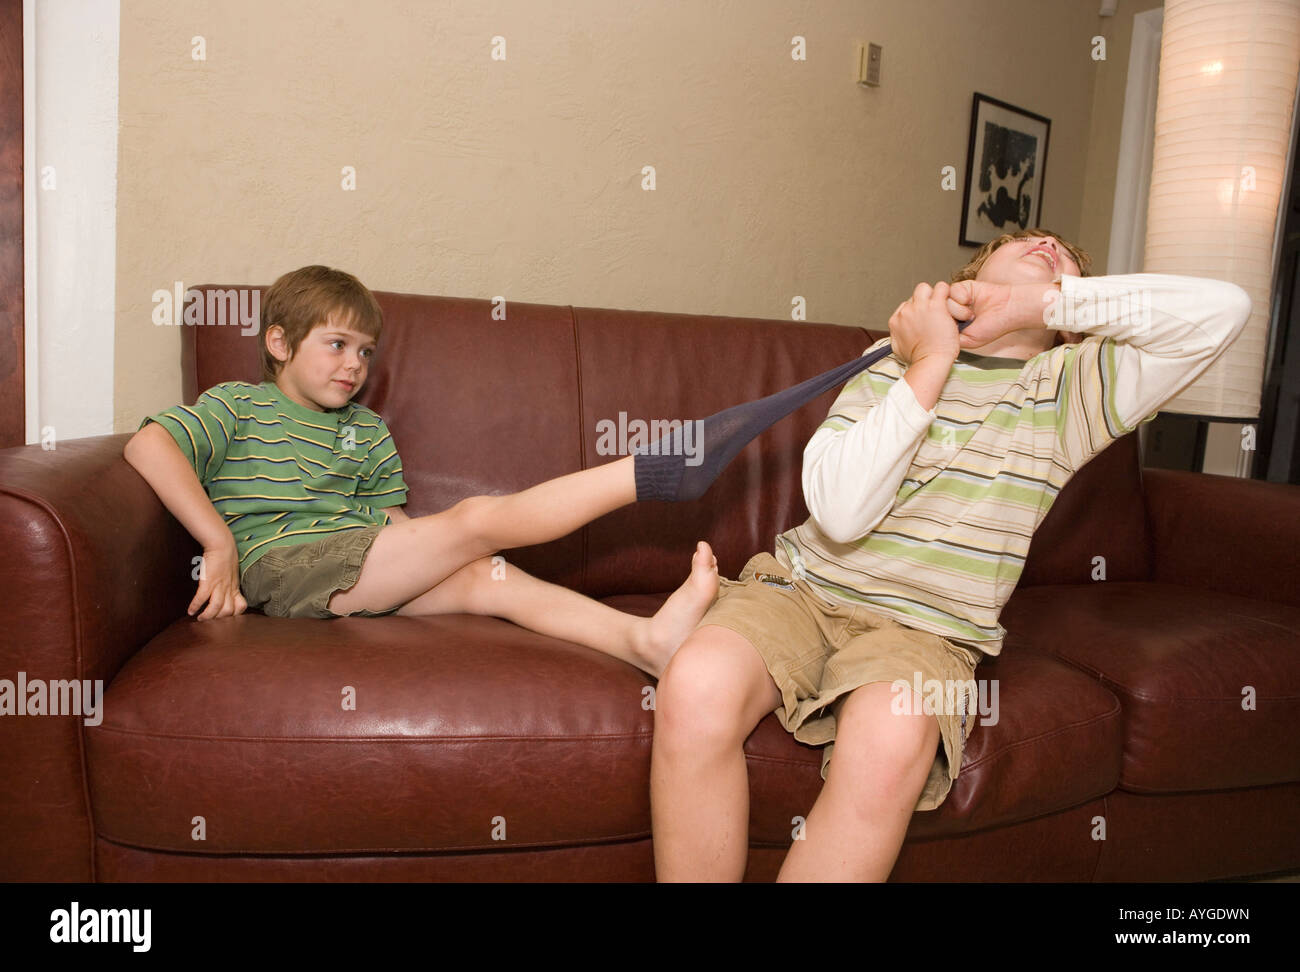 older brother pulling sock off of younger brother's foot at home on sofa  Stock Photo - Alamy